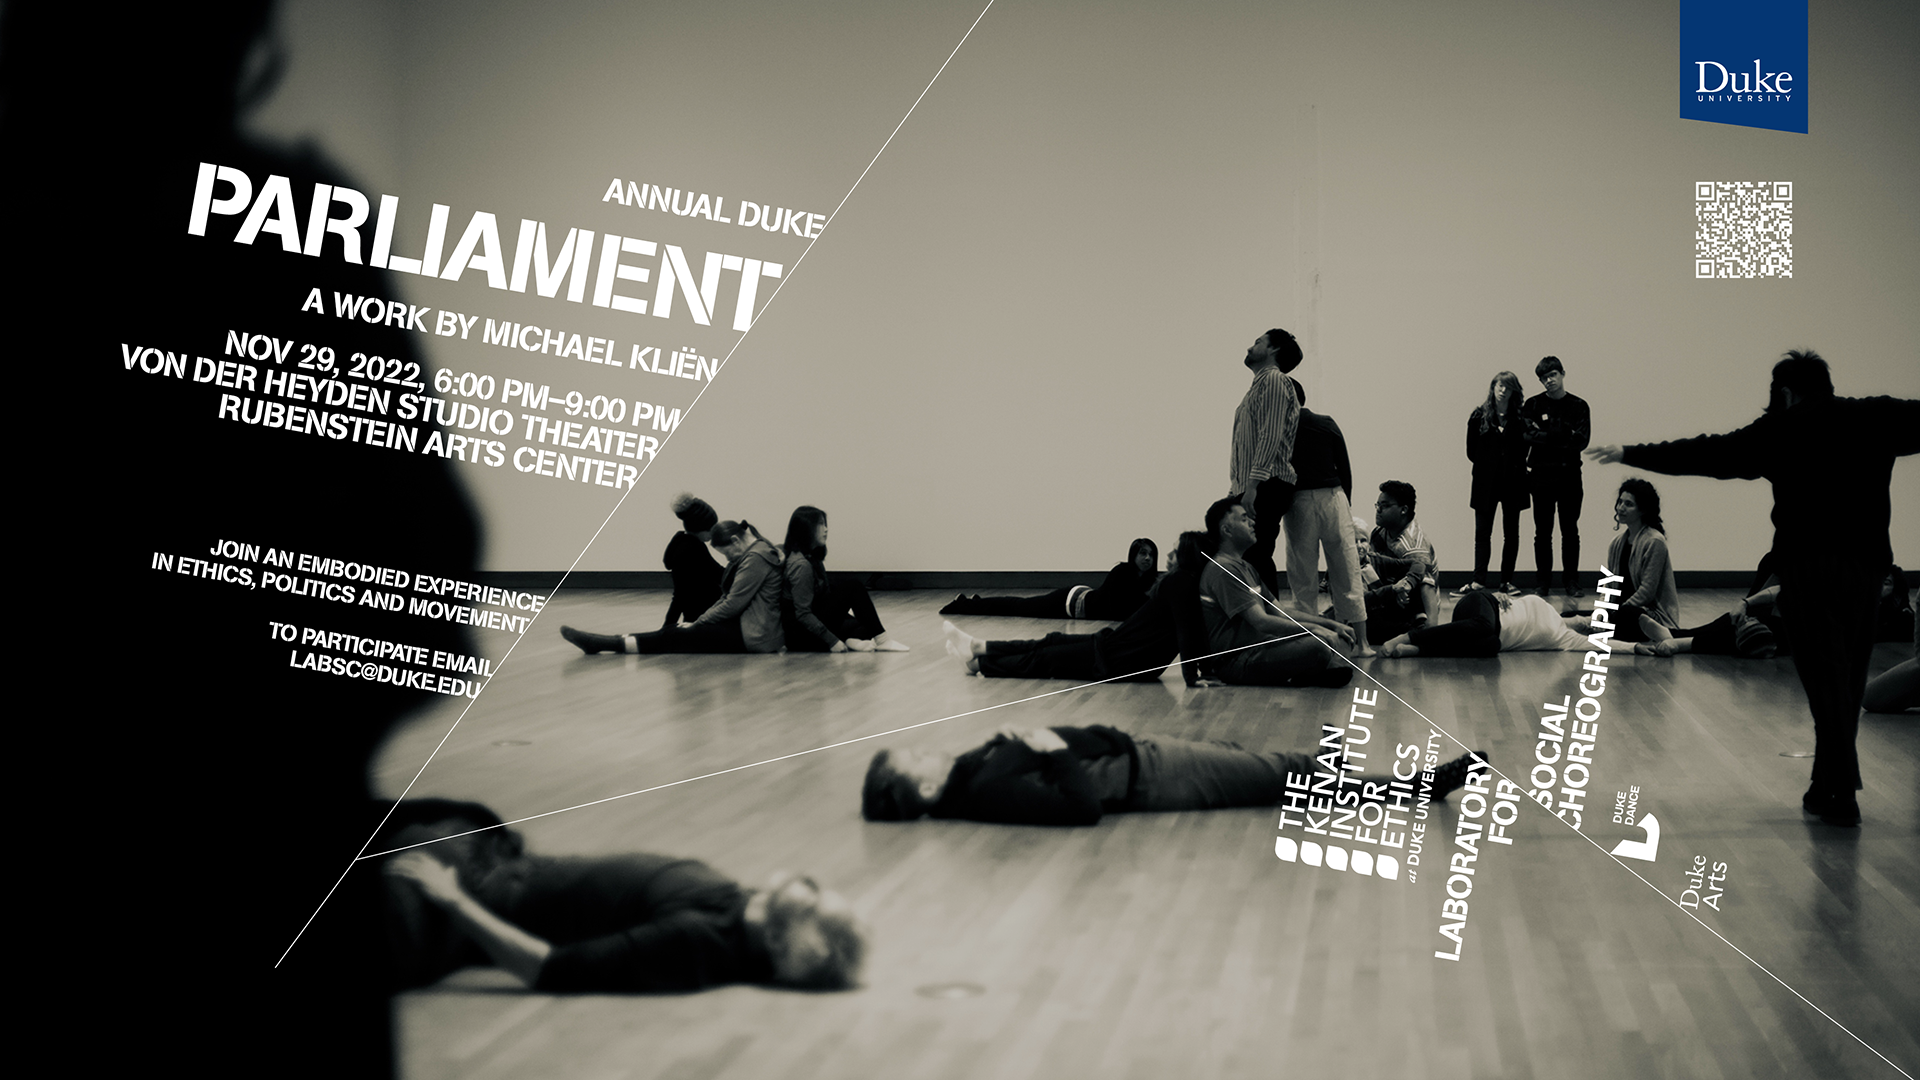 Black and ecru-toned photograph of people in gallery space. Some lie on the floor, some sit or stand in small groups, some dance. Annual Duke Parliament A Work by Michael Kliën Nov. 29, 2022, 6:00PM–9:00PM Von der Heyden Studio Theater Rubenstein Arts Center Join an Embodied Experience in Ethics, Politics and Movement To participate email labsc@duke.edu Logos for The Kenan Institute for Ethics Laboratory for Social Choreography Duke Dance Duke Arts